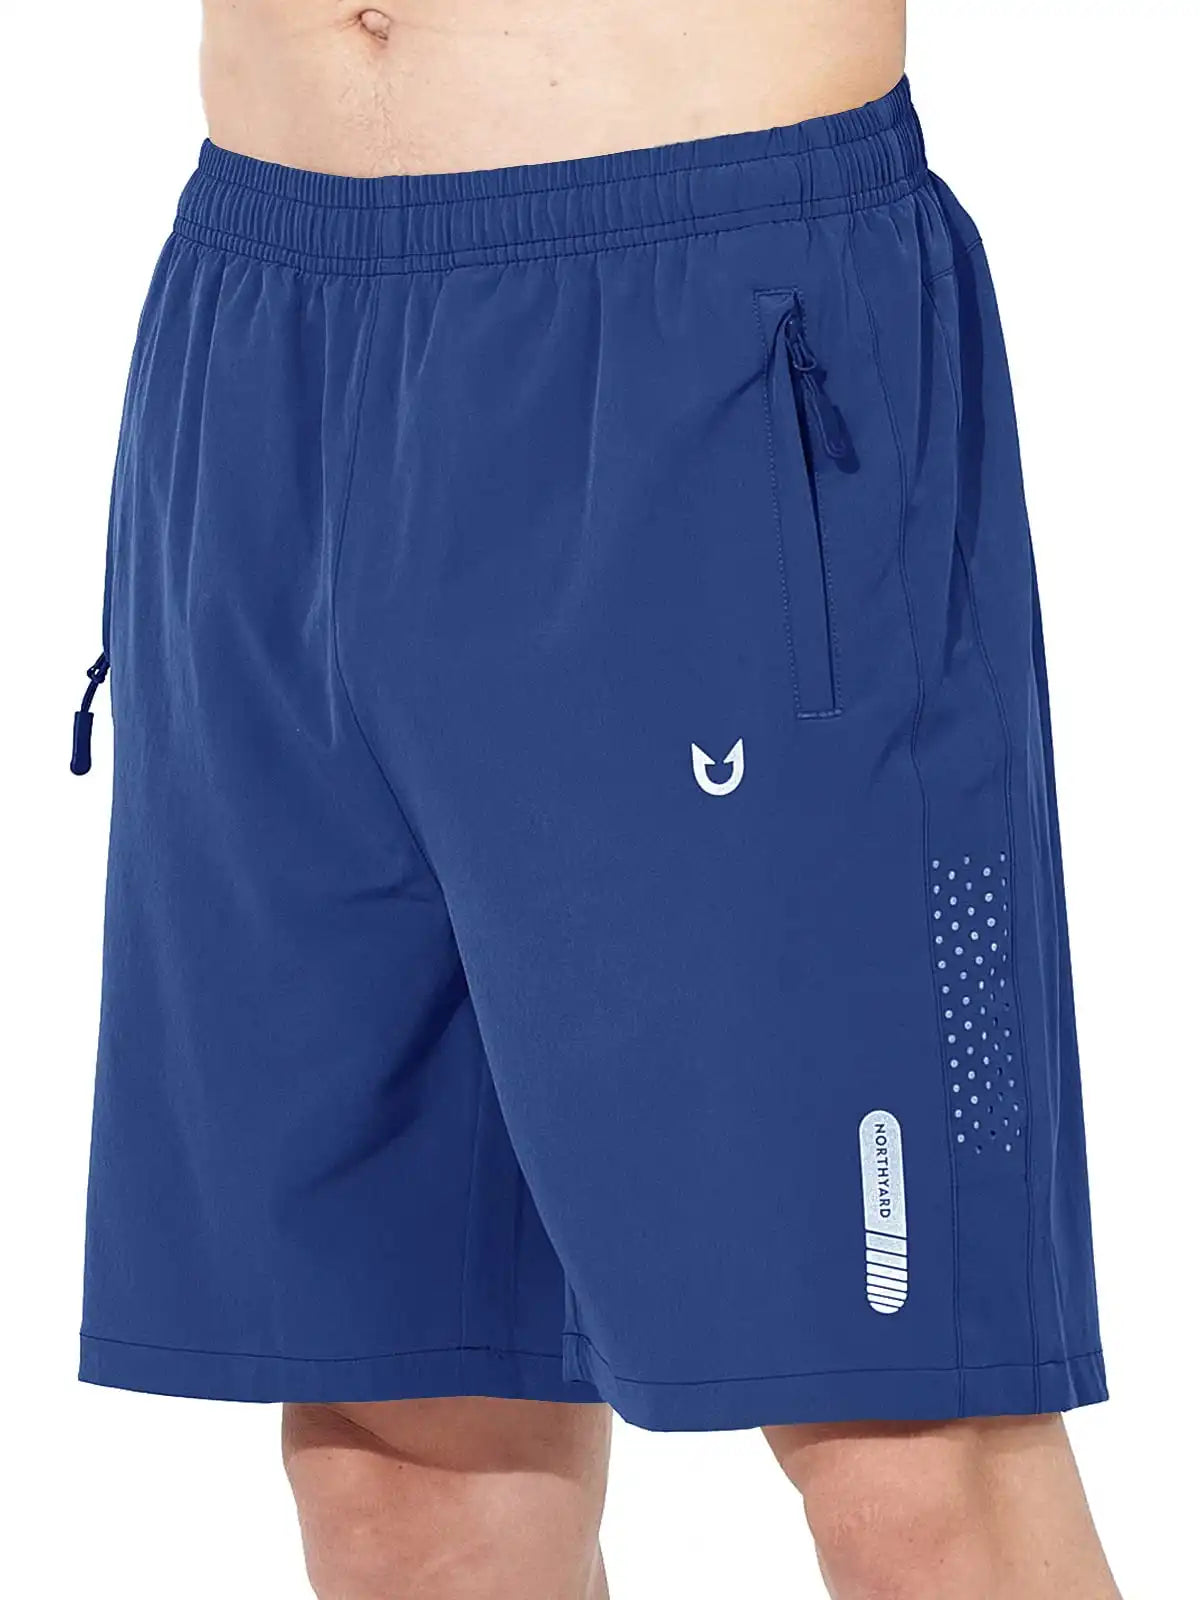 NORTHYARD Men's Athletic Hiking Shorts Quick Dry Workout Shorts 7 ...